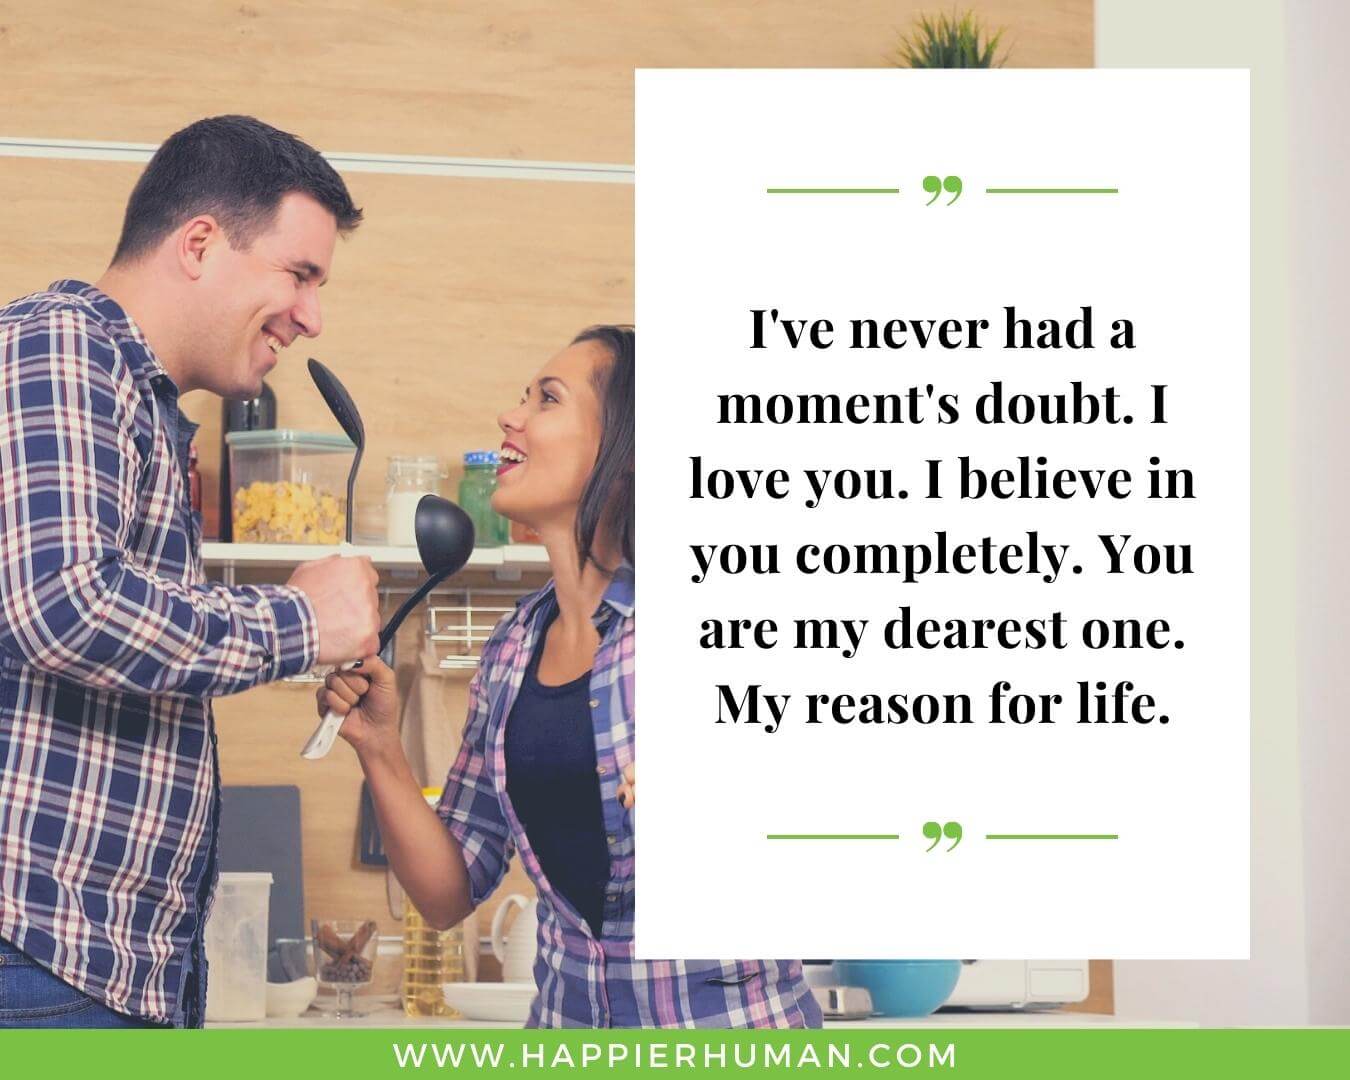 Messages of love without boundaries  - “I've never had a moment's doubt. I love you. I believe in you completely. You are my dearest one. My reason for life.”